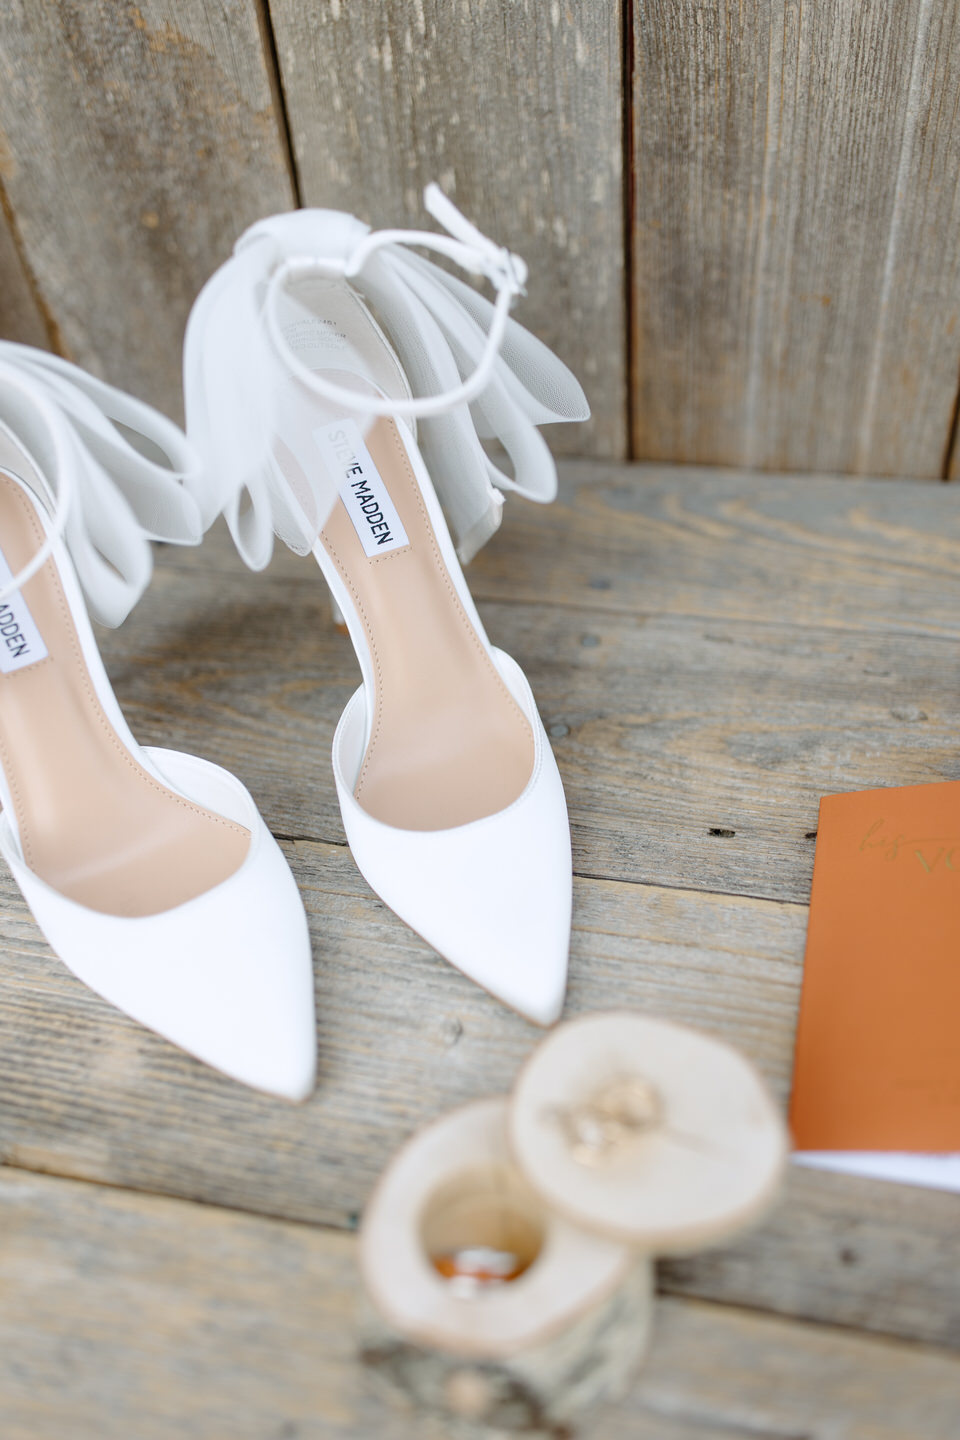 steve madden wedding shoes with bows